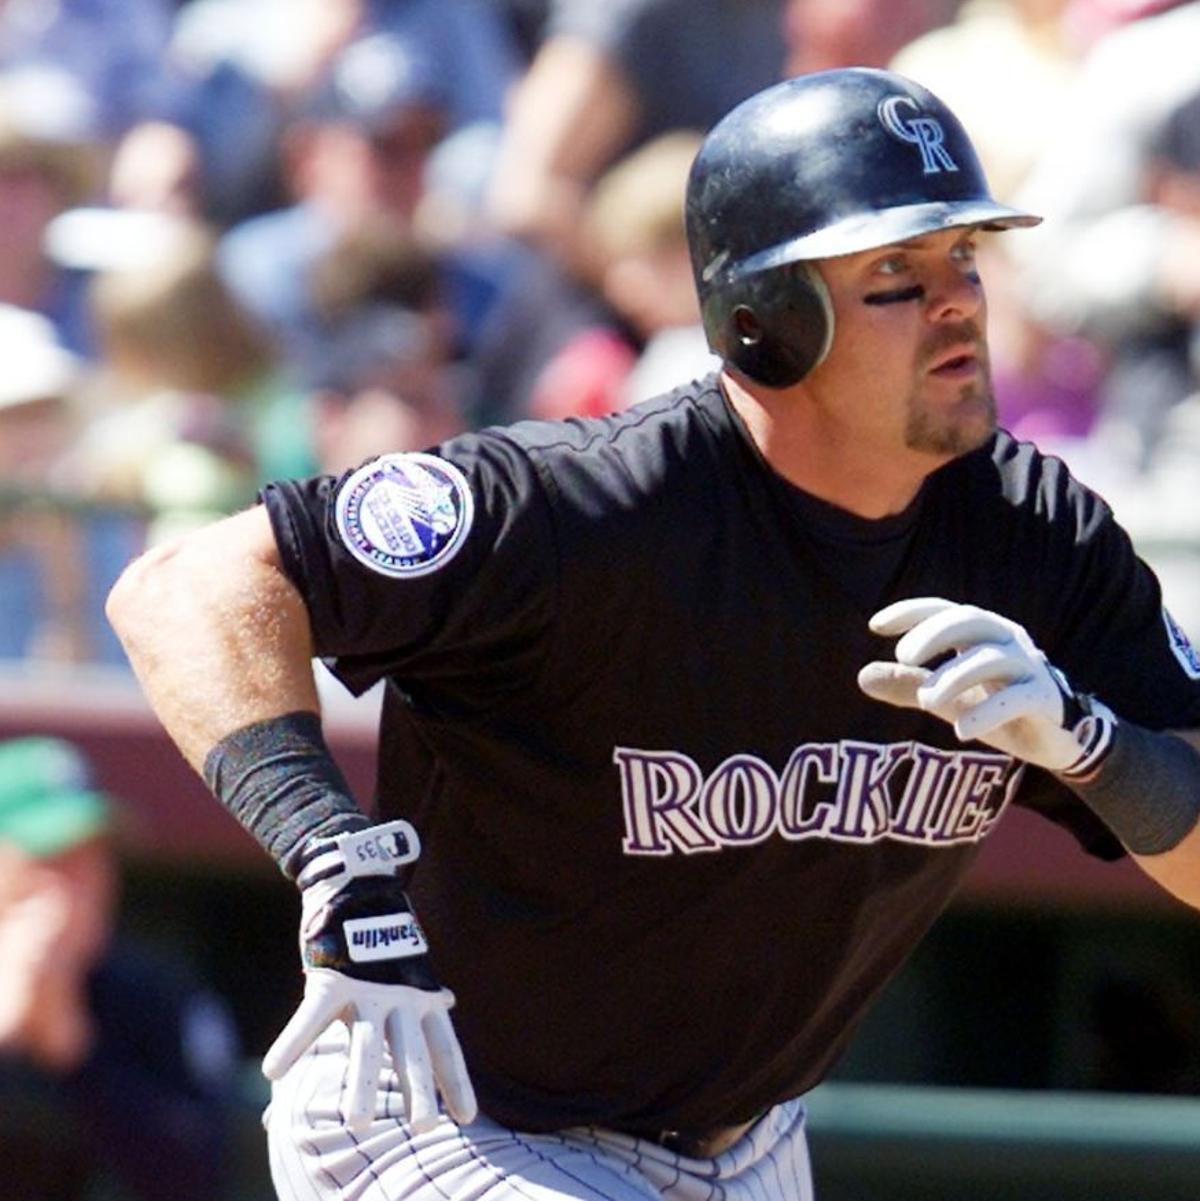 Larry Walker Finally Inducted Into Baseball Hall Of Fame, Complete